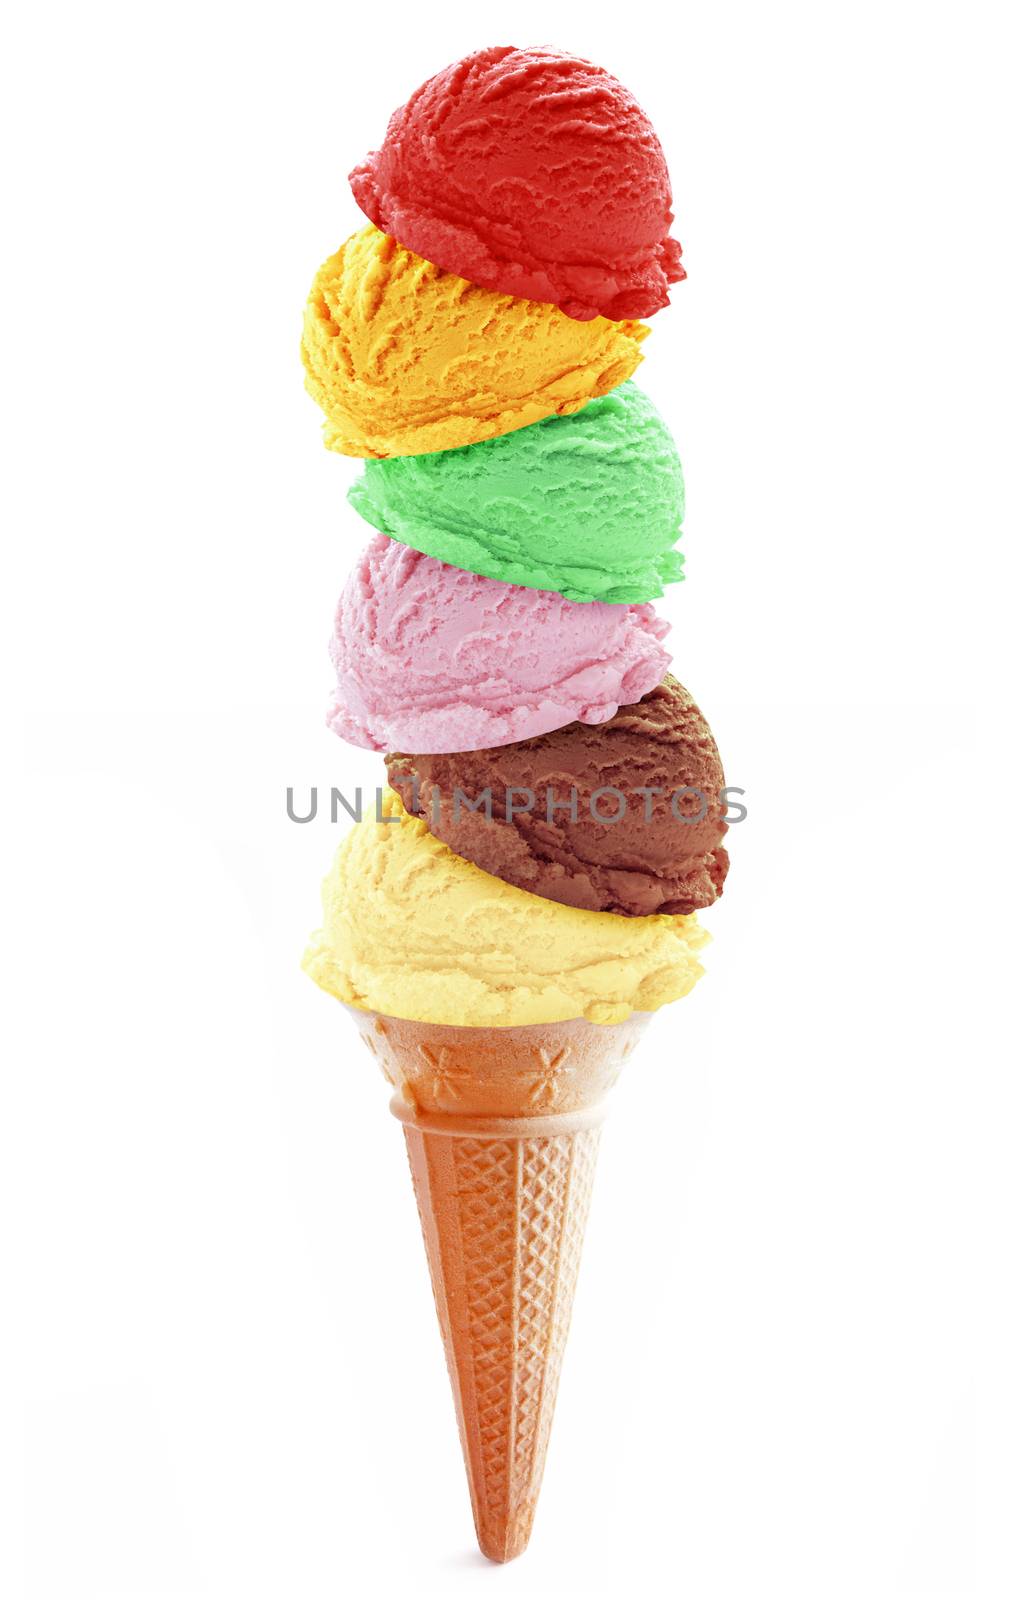 Stack of icecream scoops on a cone by unikpix